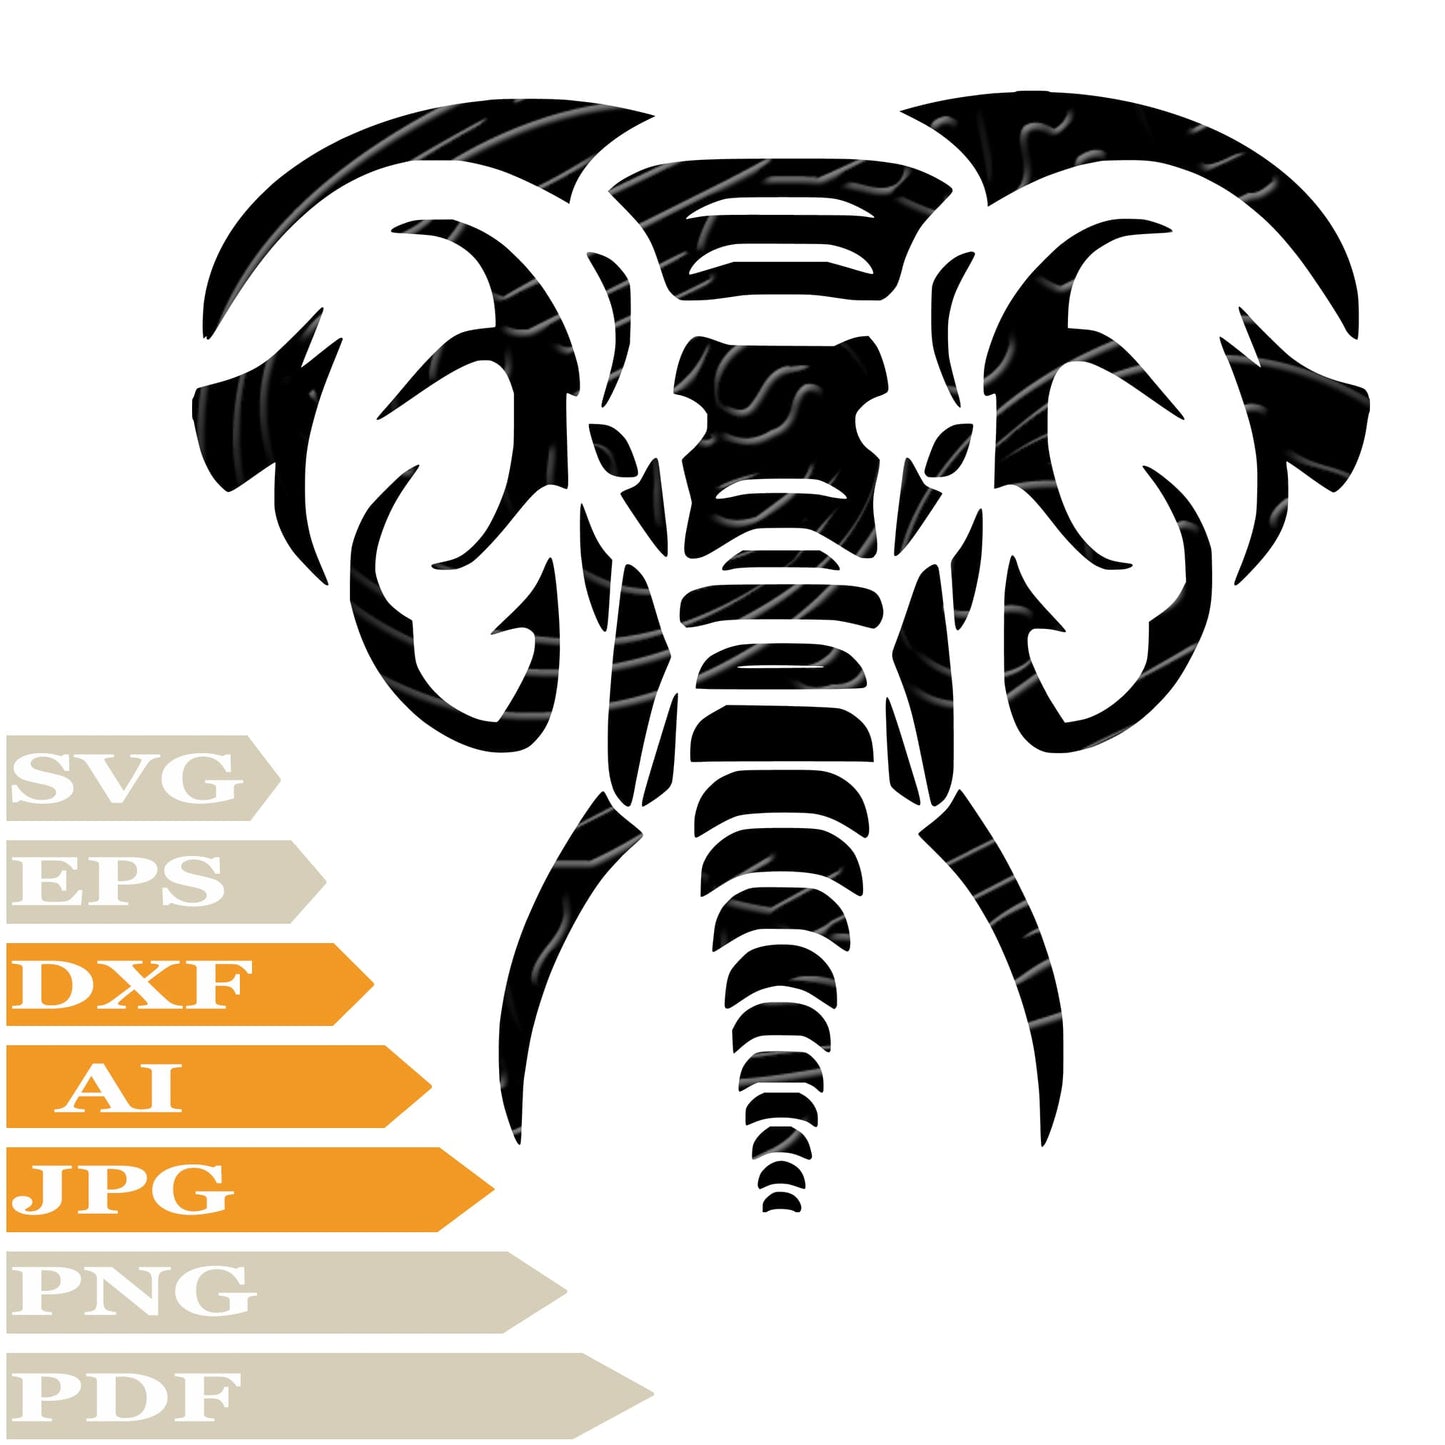 Elephant Elephant Face Svg File, Image Cut, Png, For Tattoo, Silhouette, Digital Vector Download, Cut File, Clipart, For Cricut